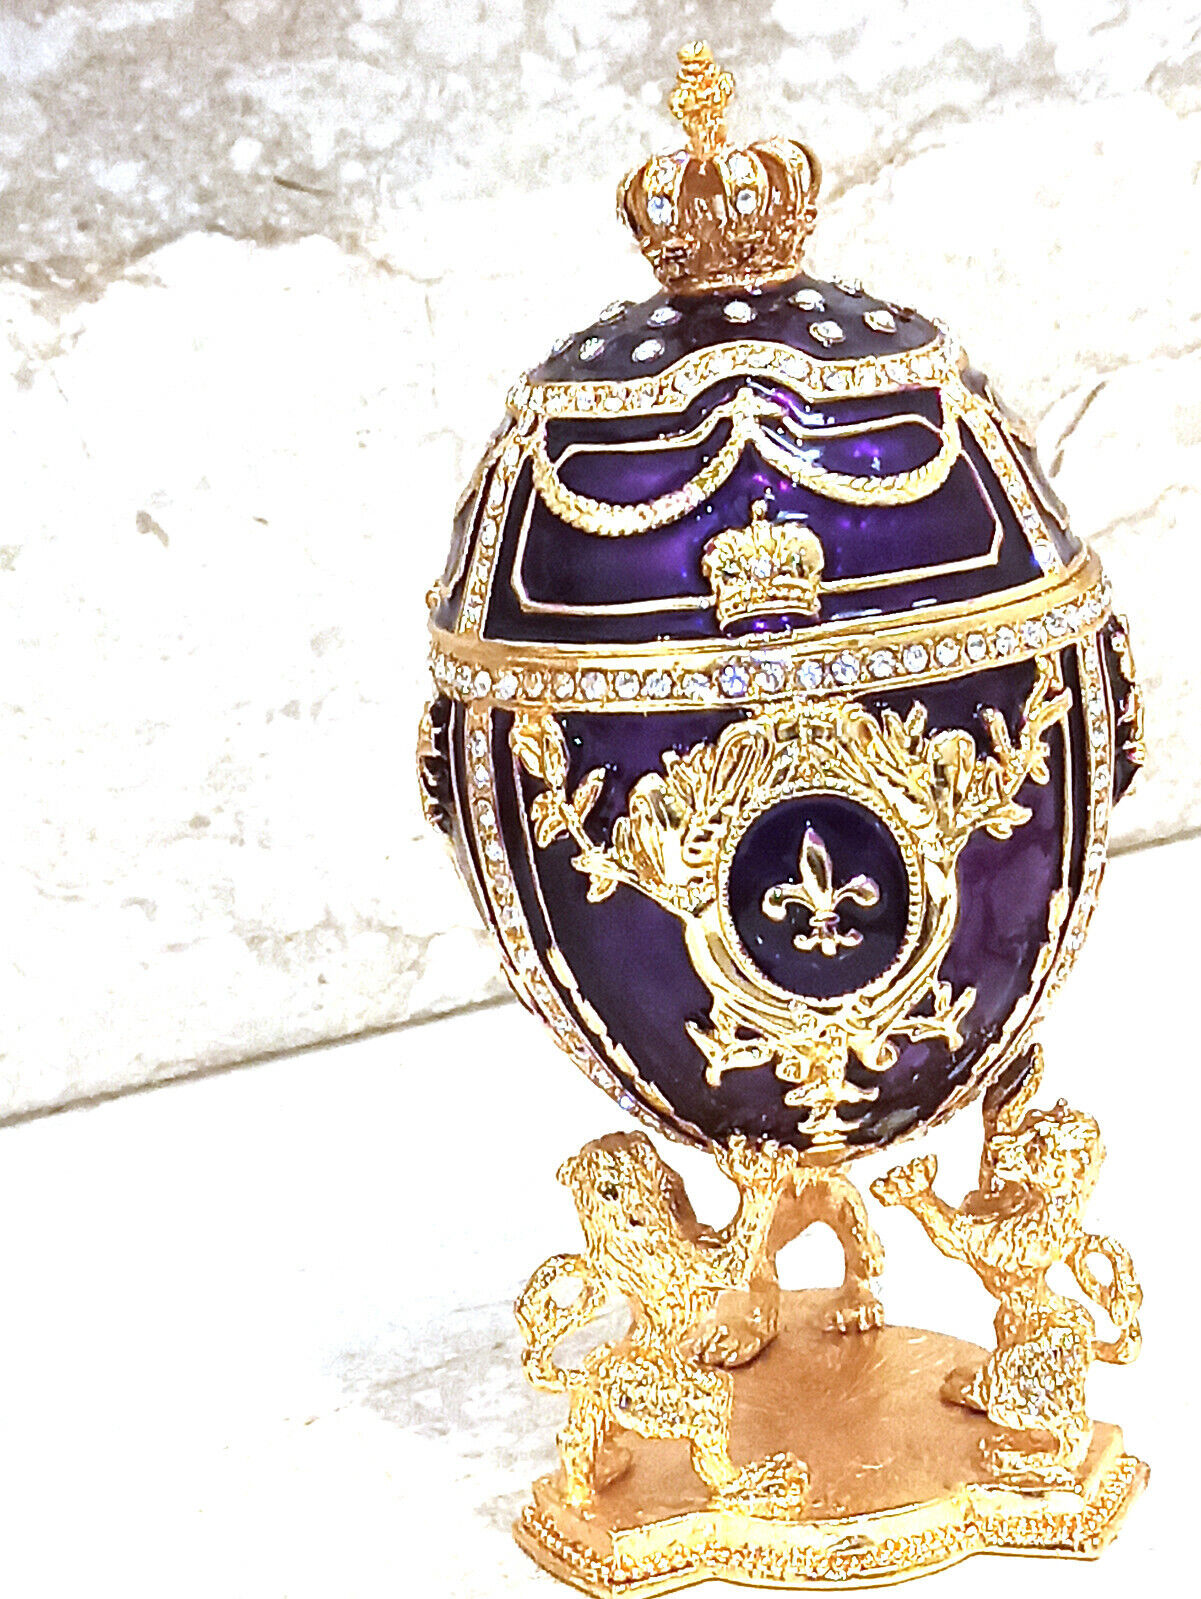 Faberge egg Queens Carriage Fabergé Fabrege Jewelry box set 24K GOLD gift women